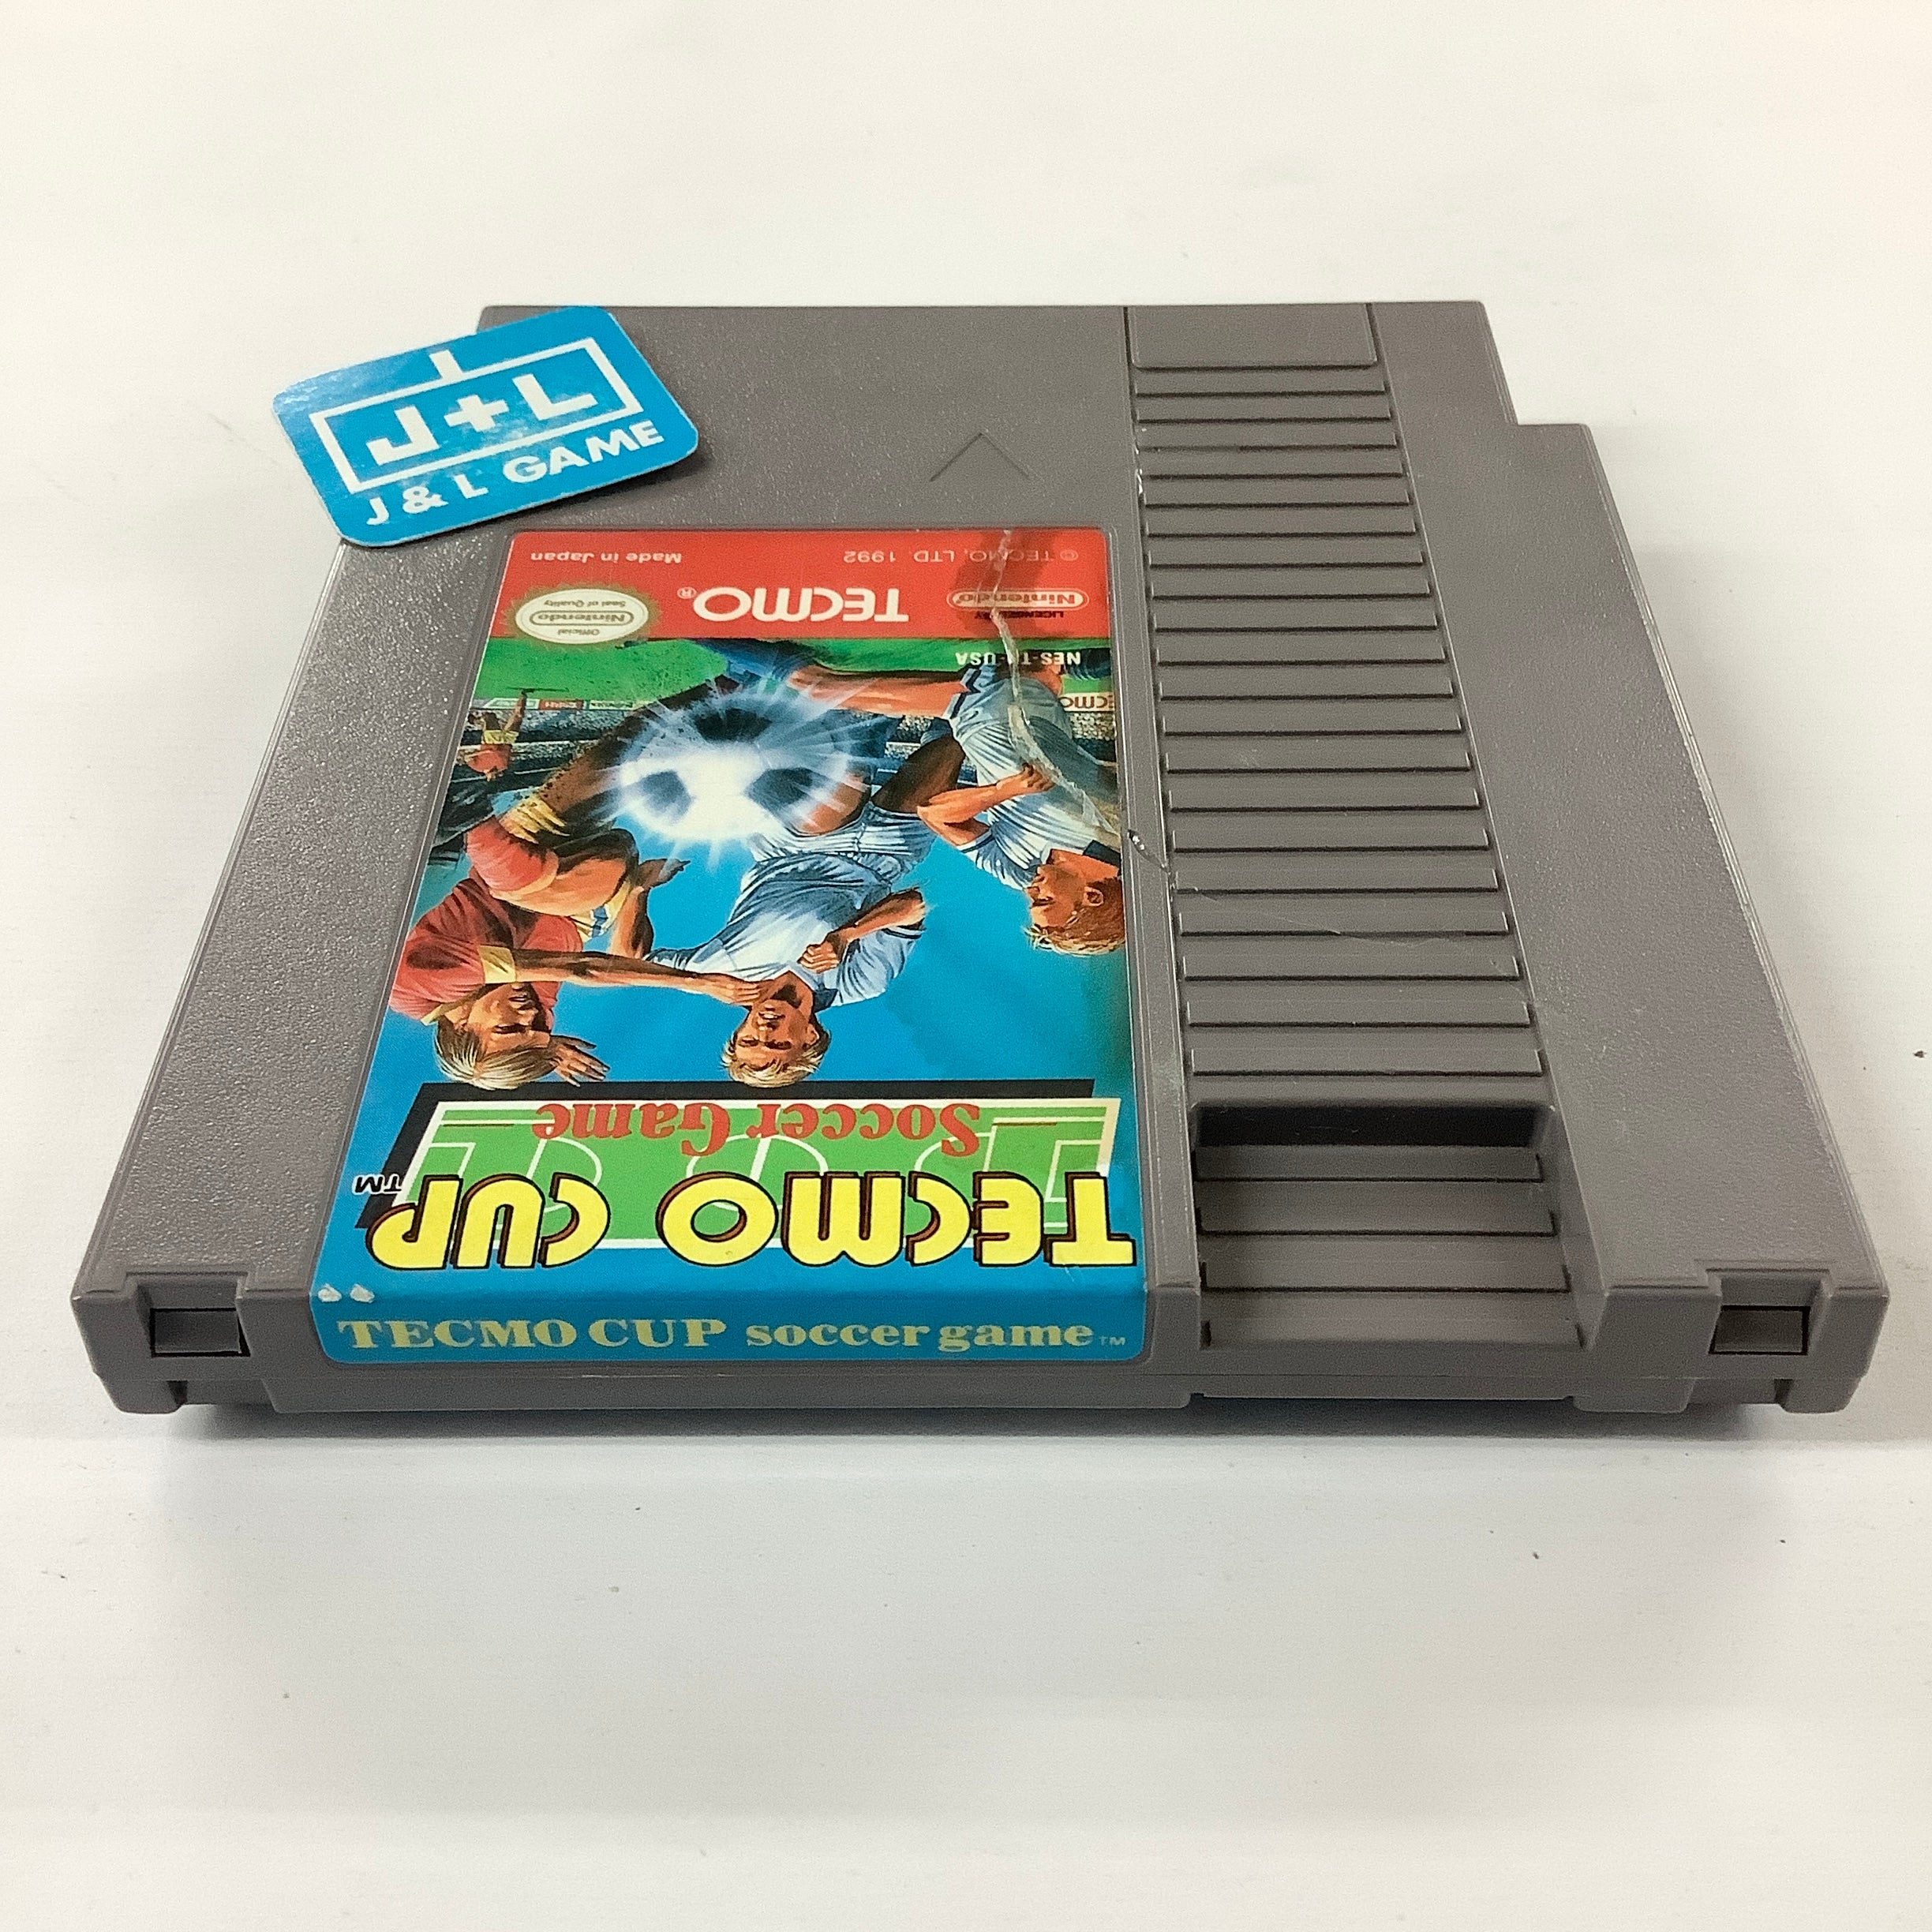 Tecmo Cup Soccer Game - (NES) Nintendo Entertainment System [Pre-Owned] Video Games Tecmo   